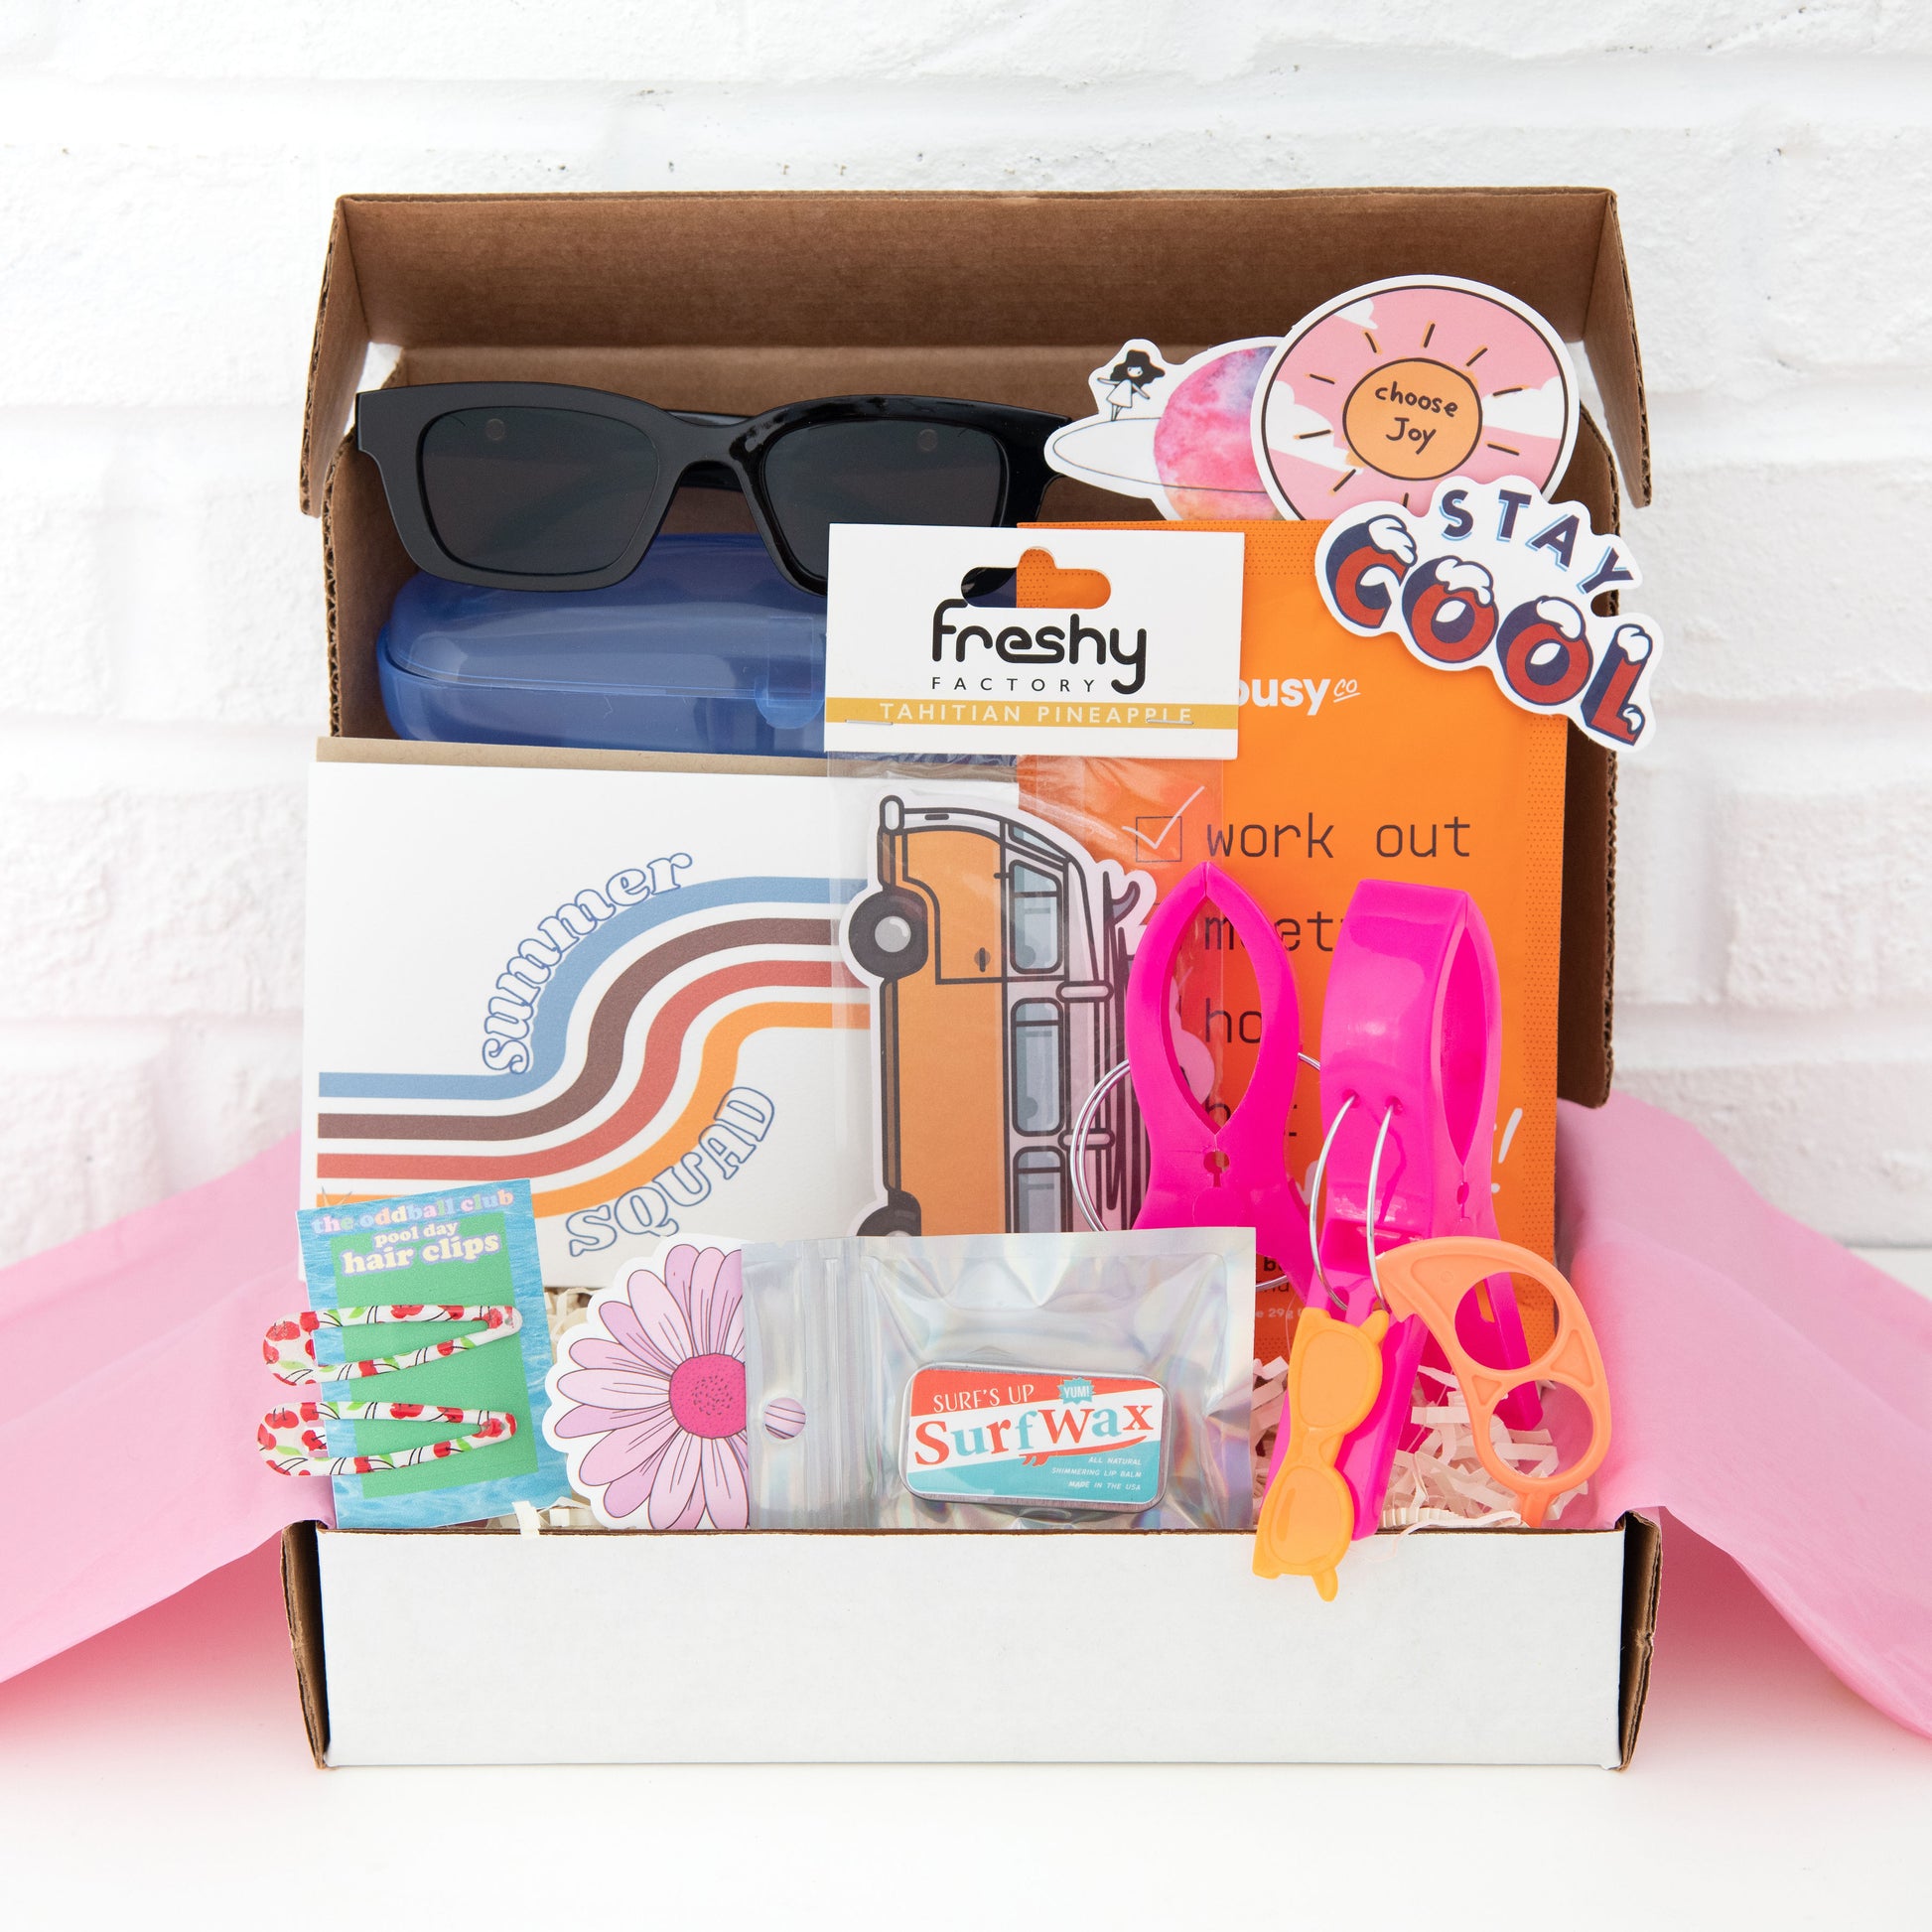 Celebrate summer with our ultimate summer-themed subscription box! This box includes a pair of stylish sunglasses to protect your eyes from the sun, a colorful beach towel for your beach or pool day, a refreshing summer-scented candle, a trendy hair clips, and a beachy greeting card to send to your loved ones. Don't miss out on these summer essentials!